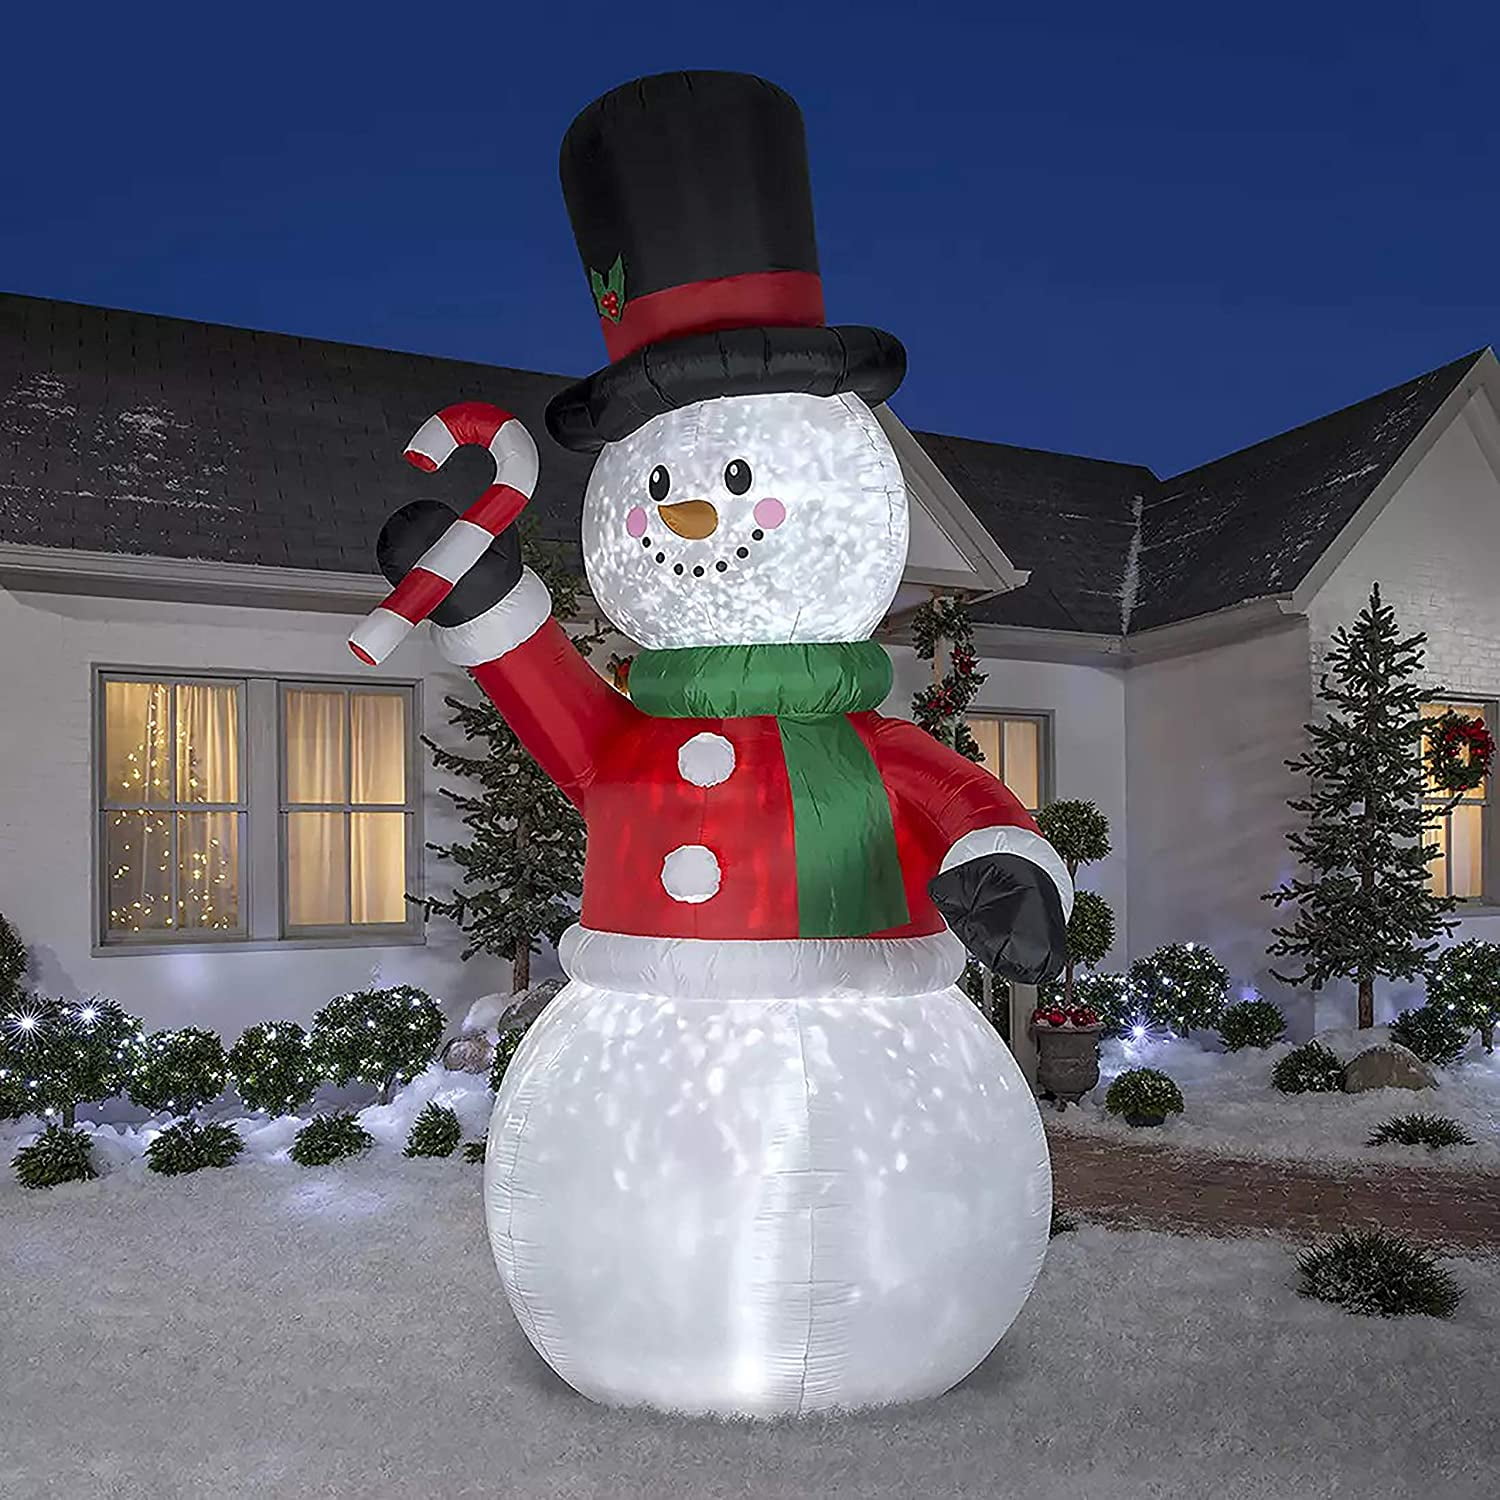 12' Gemmy Airblown Inflatable Kaleidoscope Giant Snowman with Giant ...